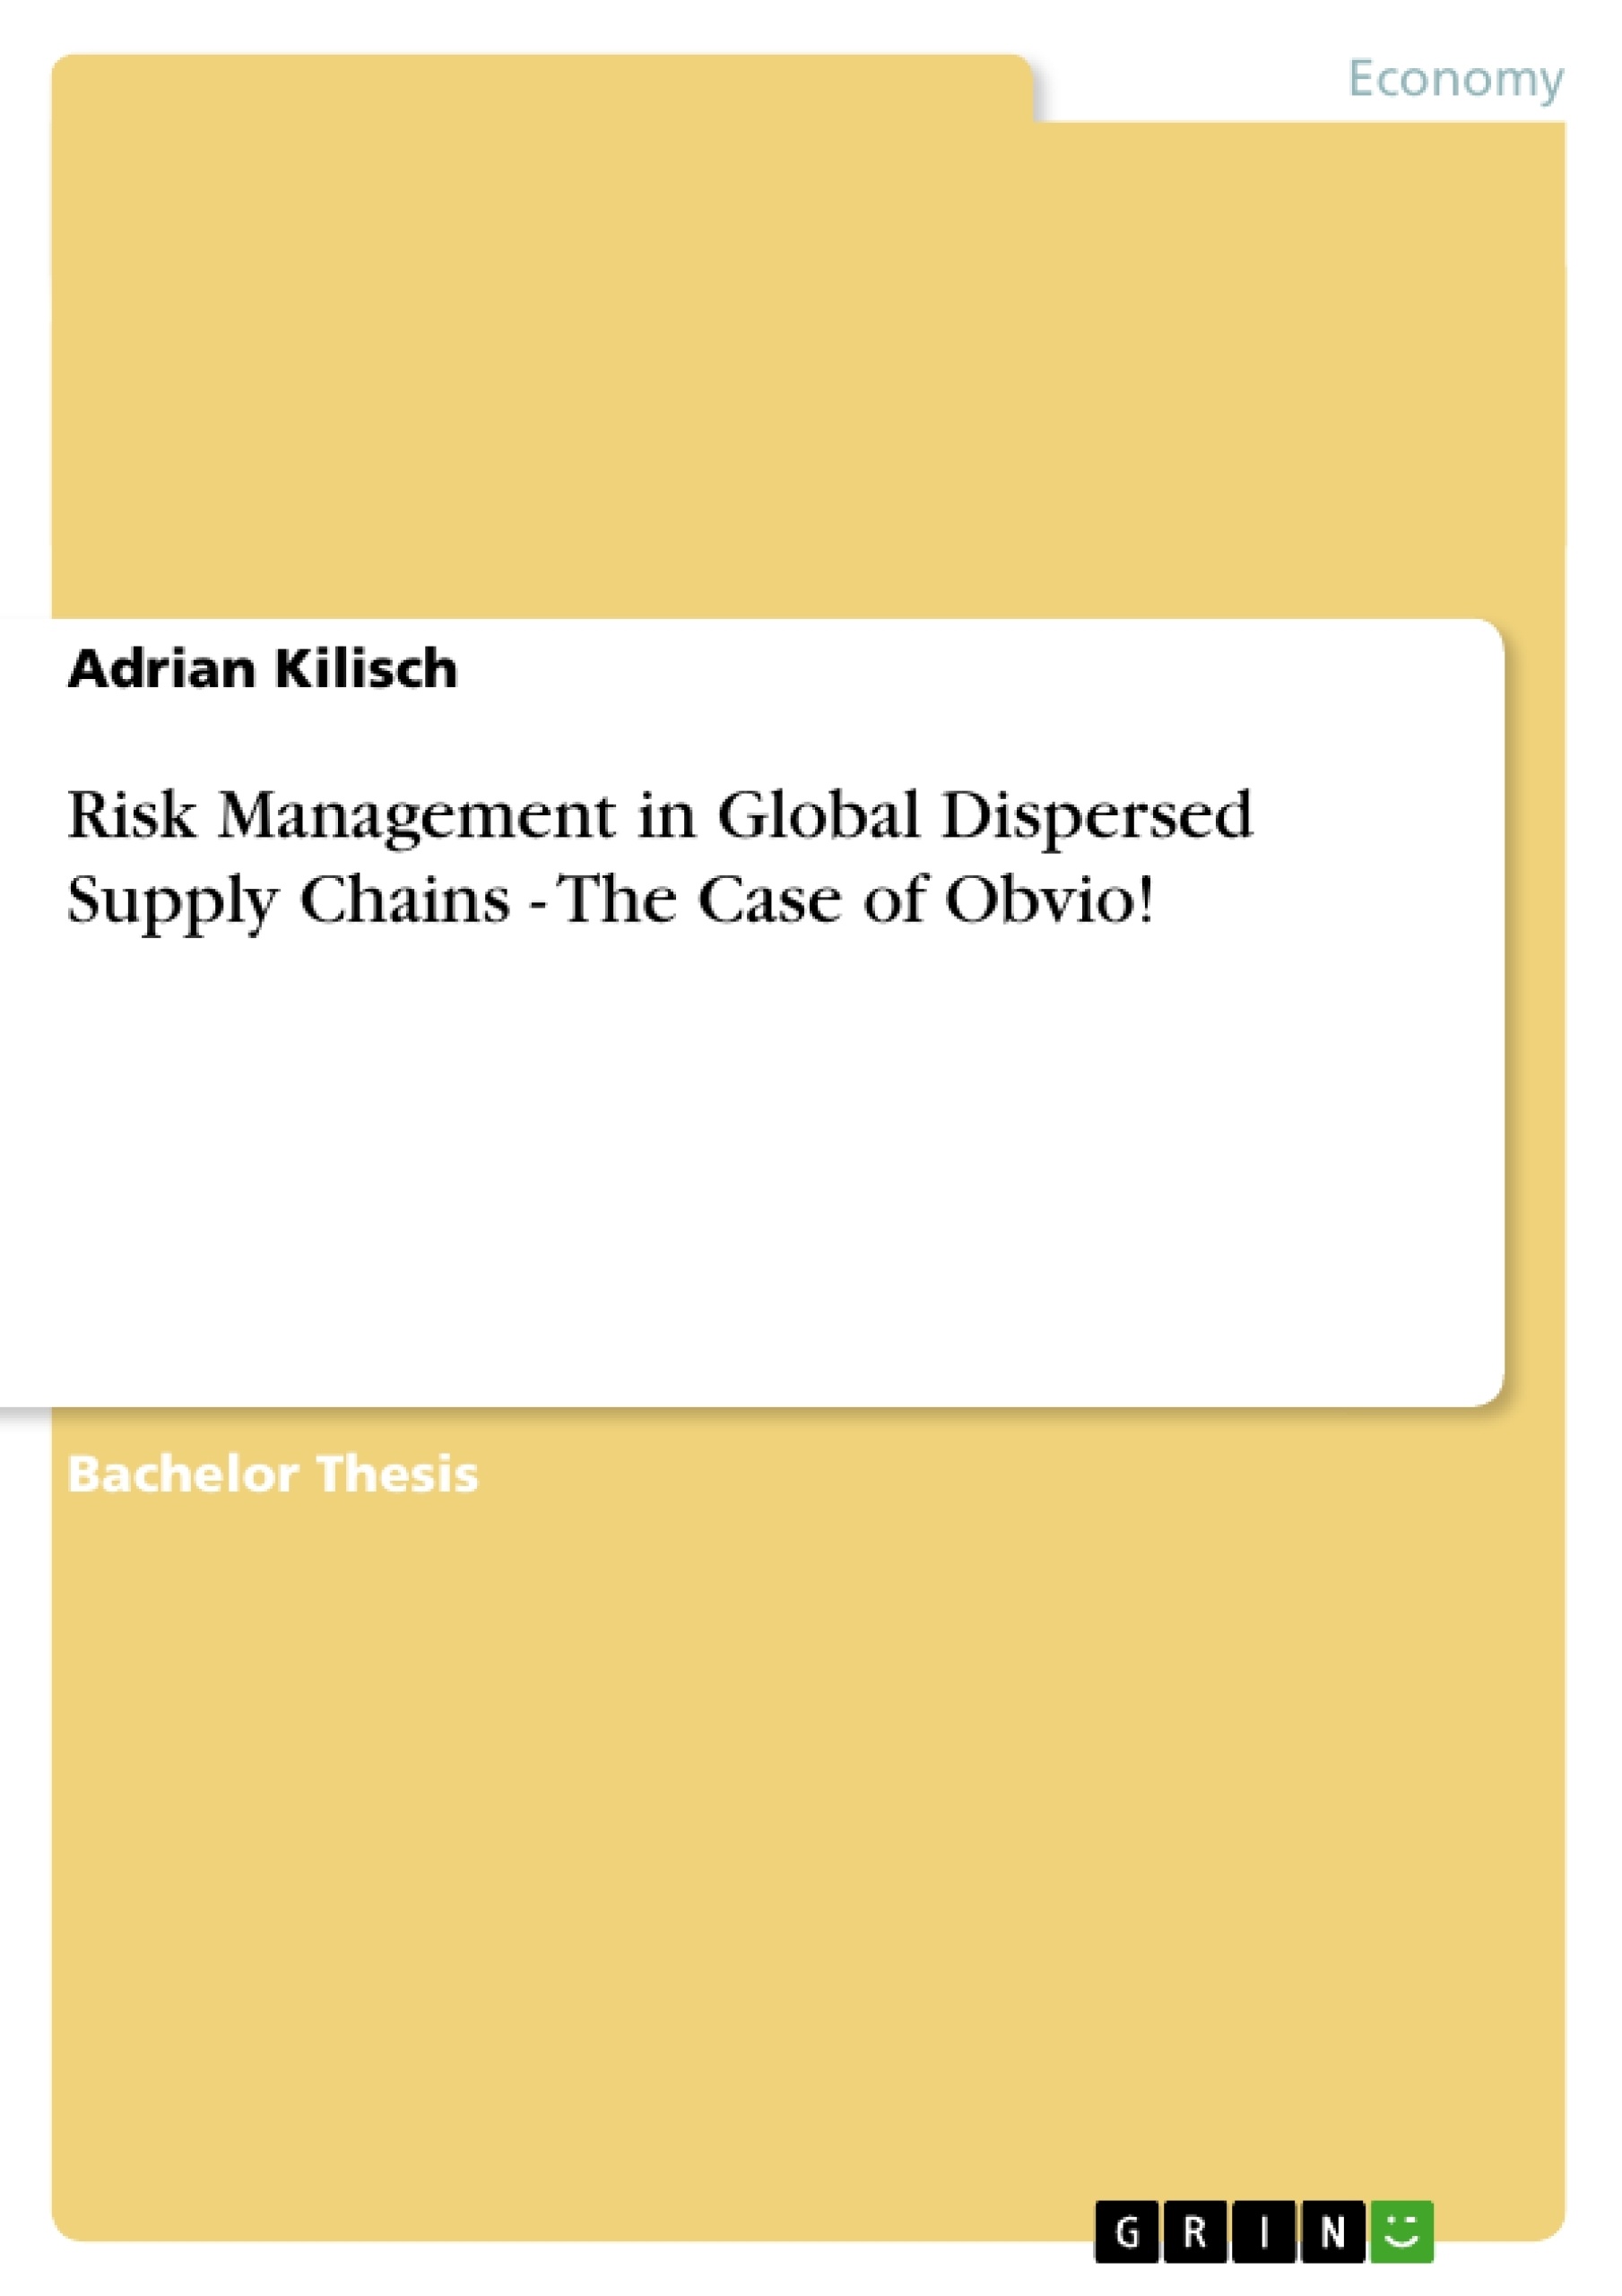 Title: Risk Management in Global Dispersed Supply Chains - The Case of Obvio!